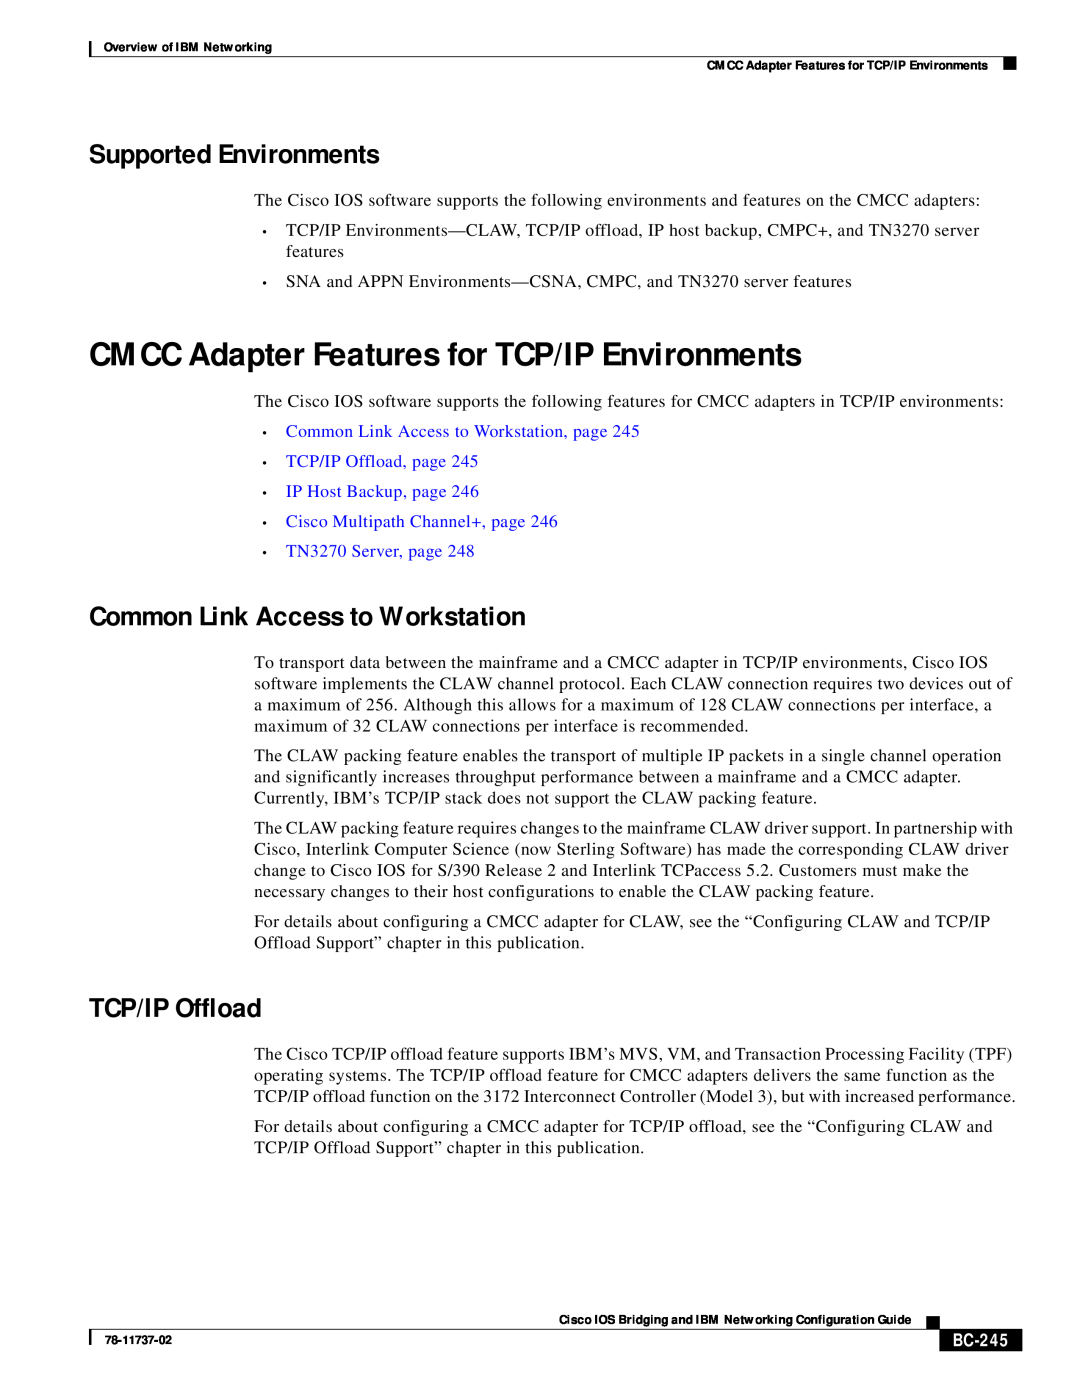 IBM BC-201 manual CMCC Adapter Features for TCP/IP Environments, Supported Environments, Common Link Access to Workstation 